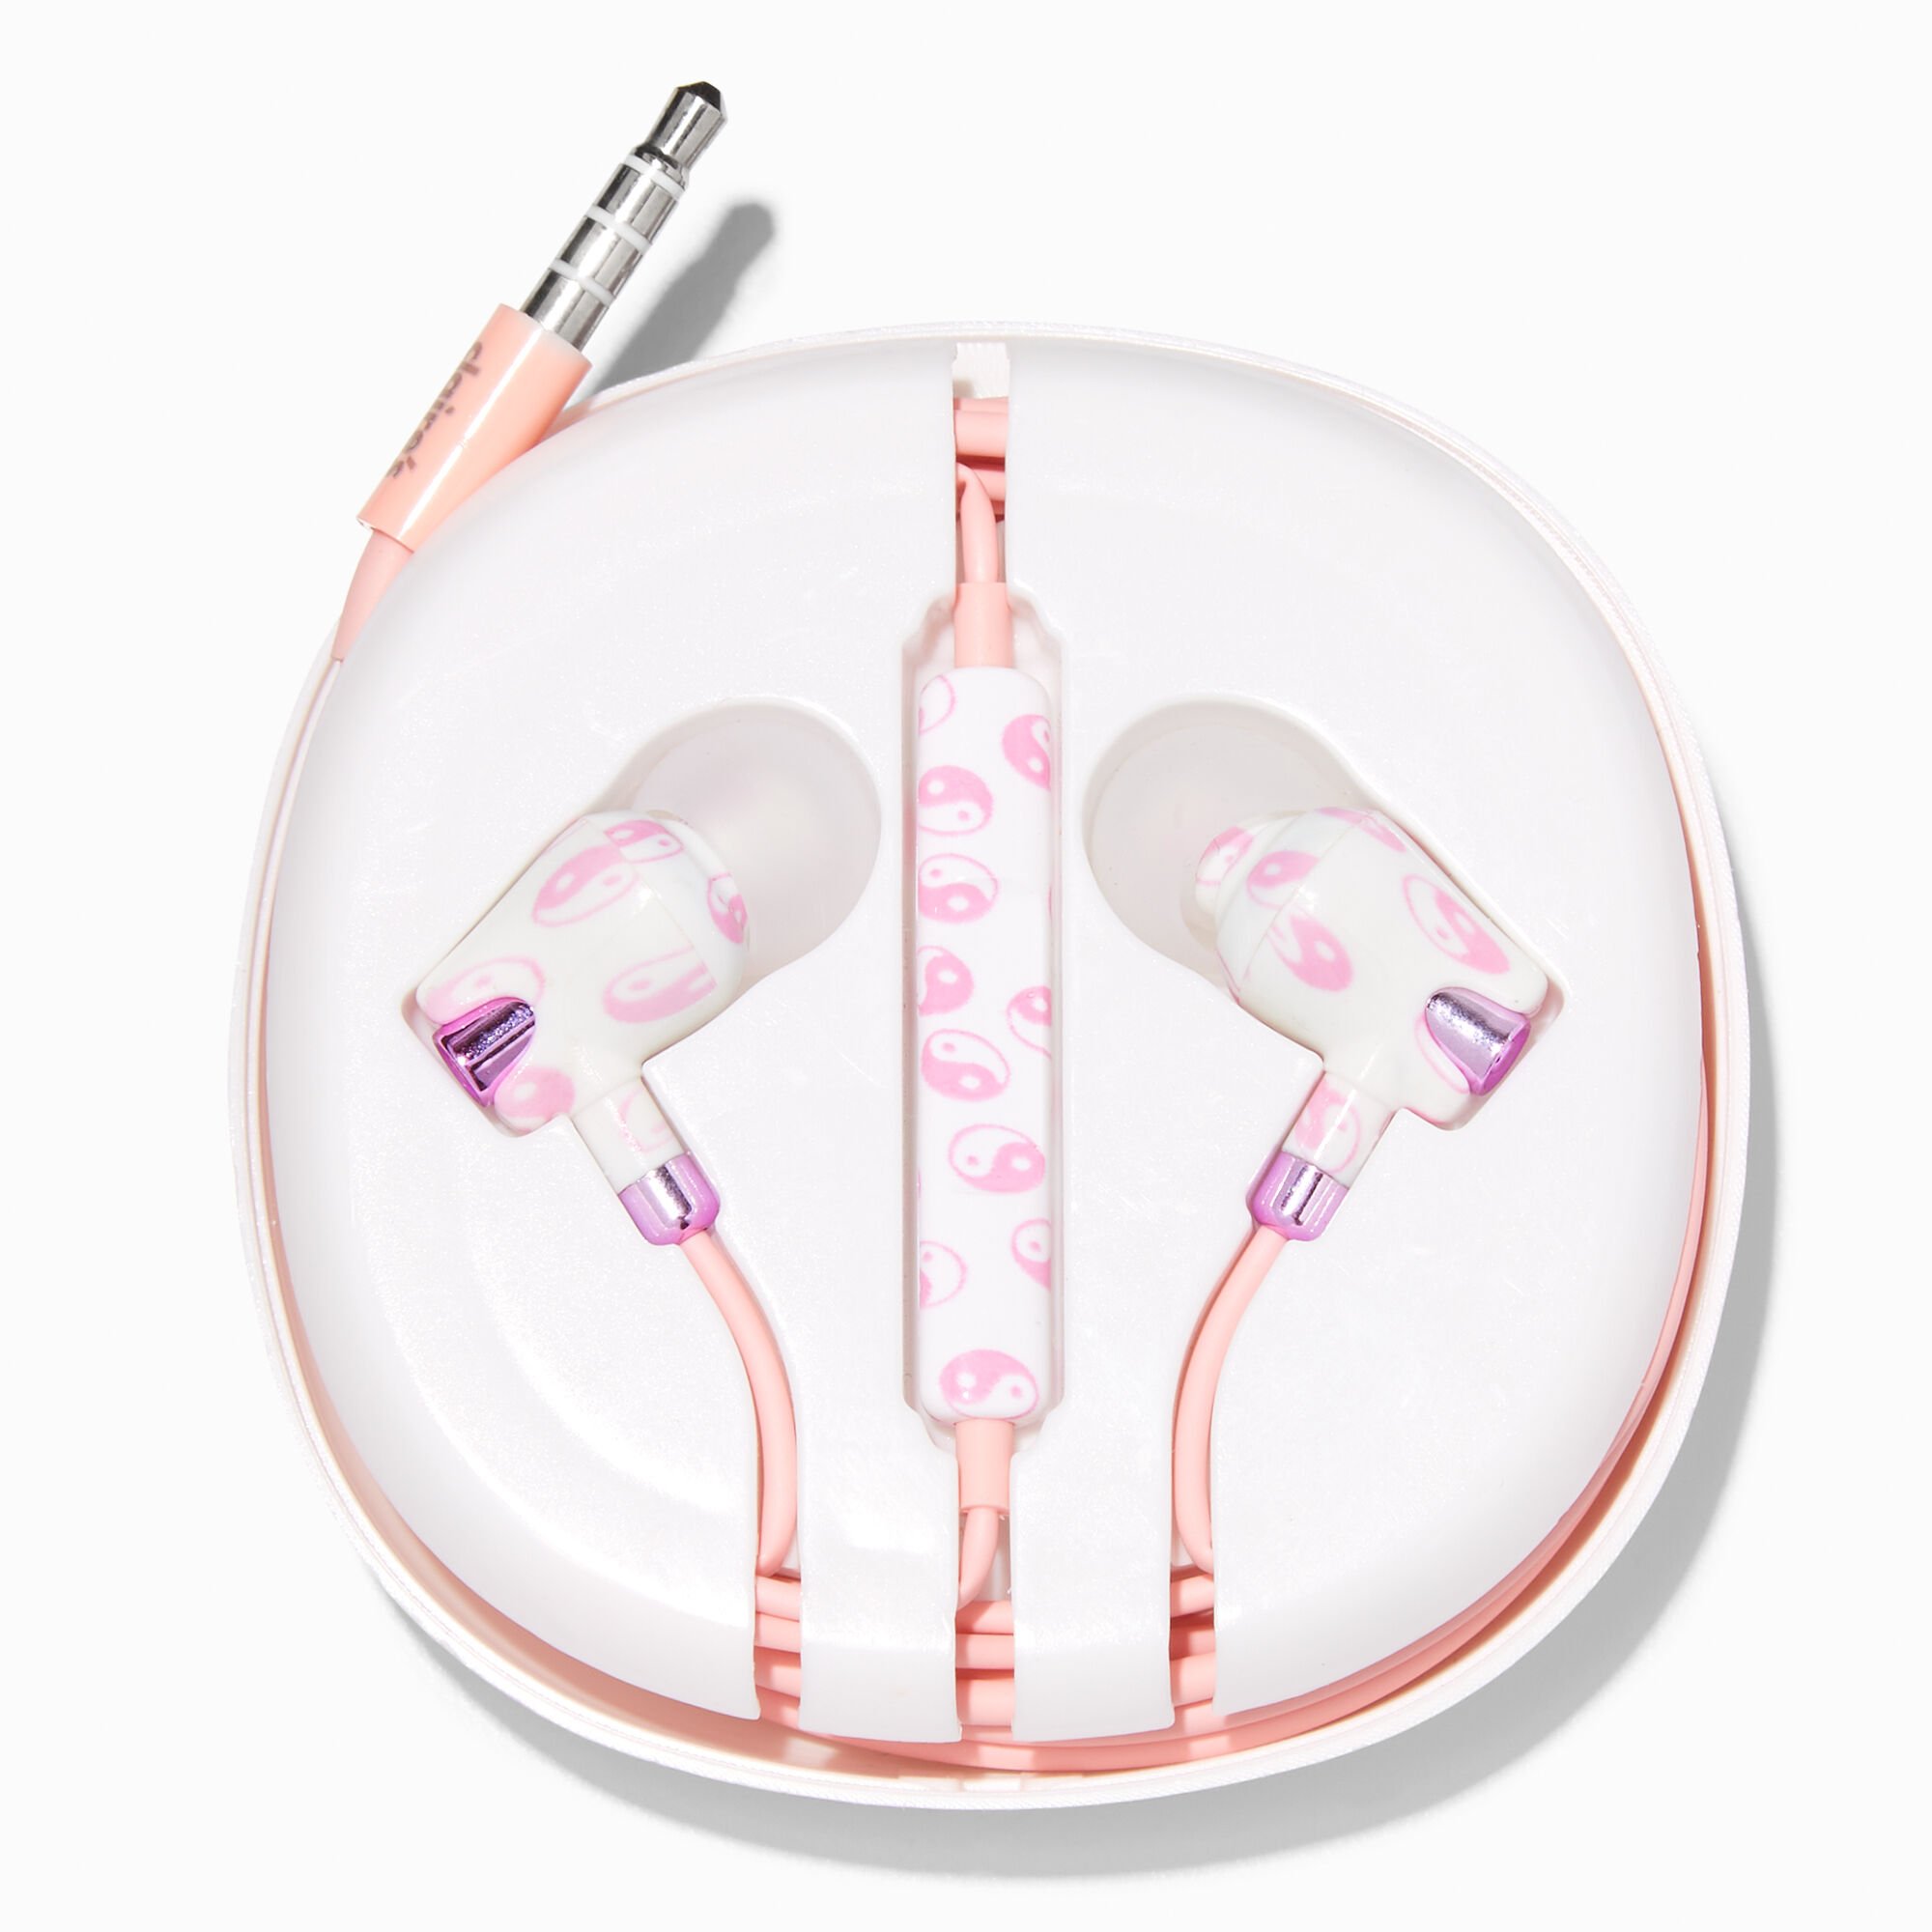 View Claires Yin Yang Symbol Silicone Earbuds Pink information